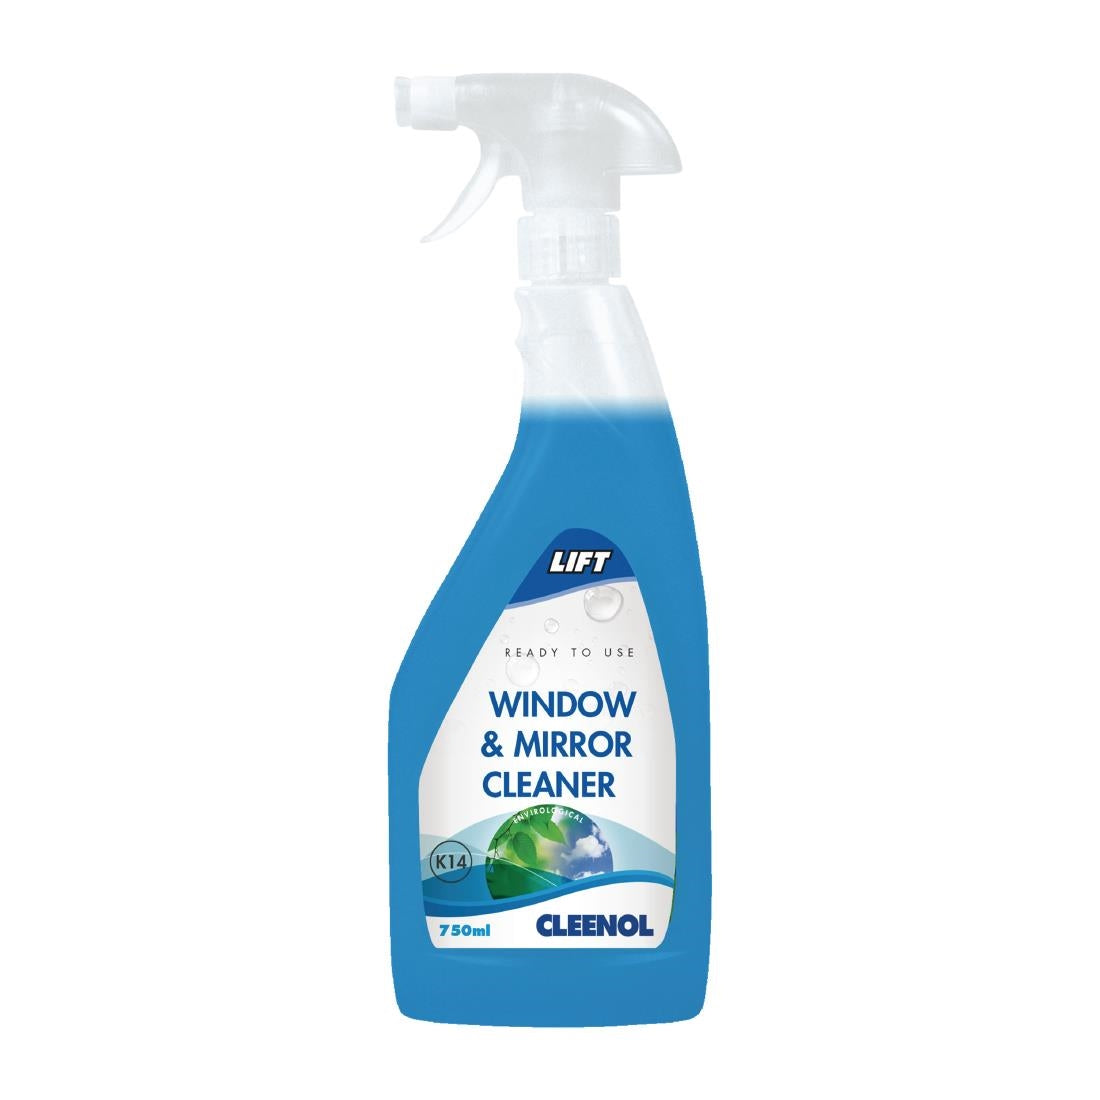 FS095 Cleenol Lift Window and Mirror Cleaner 750ml (Pack of 6) JD Catering Equipment Solutions Ltd